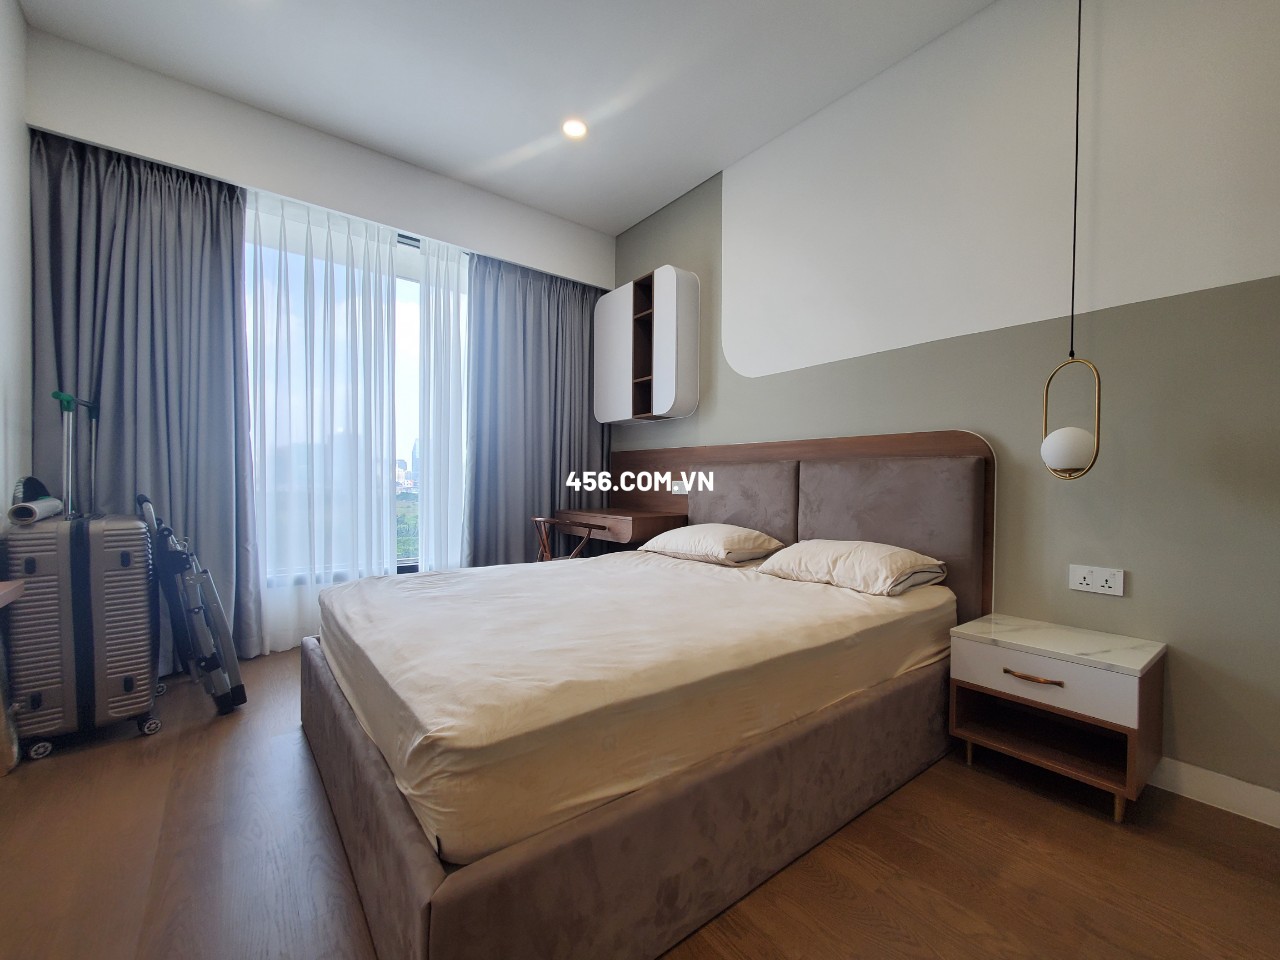 Hinh-2 Bedrooms The River Thu Thiem apartment for rent Morden Furnished